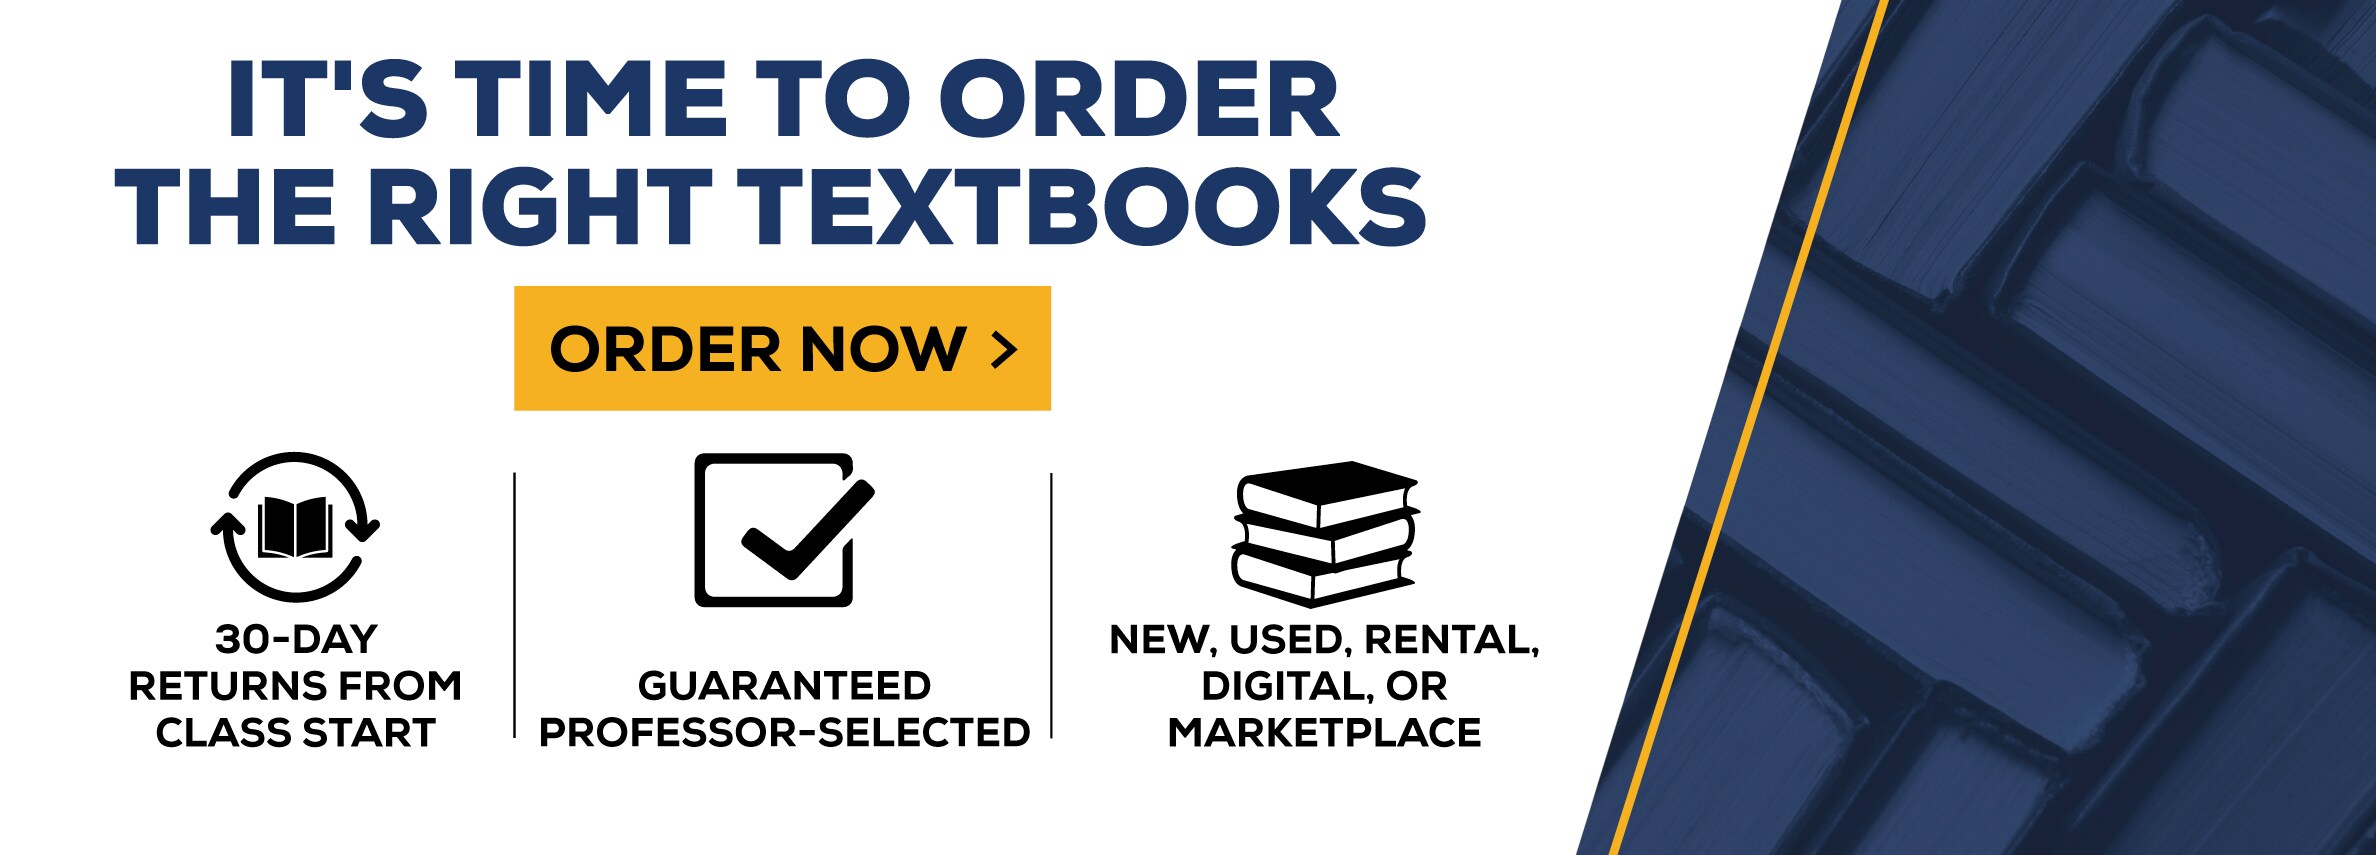 It's Time To Order The Right Textbooks. Order Now.  30 Day Returns from class start. Guaranteed Professor-Selected. New, Used, Rental, Digital, or Marketplace.